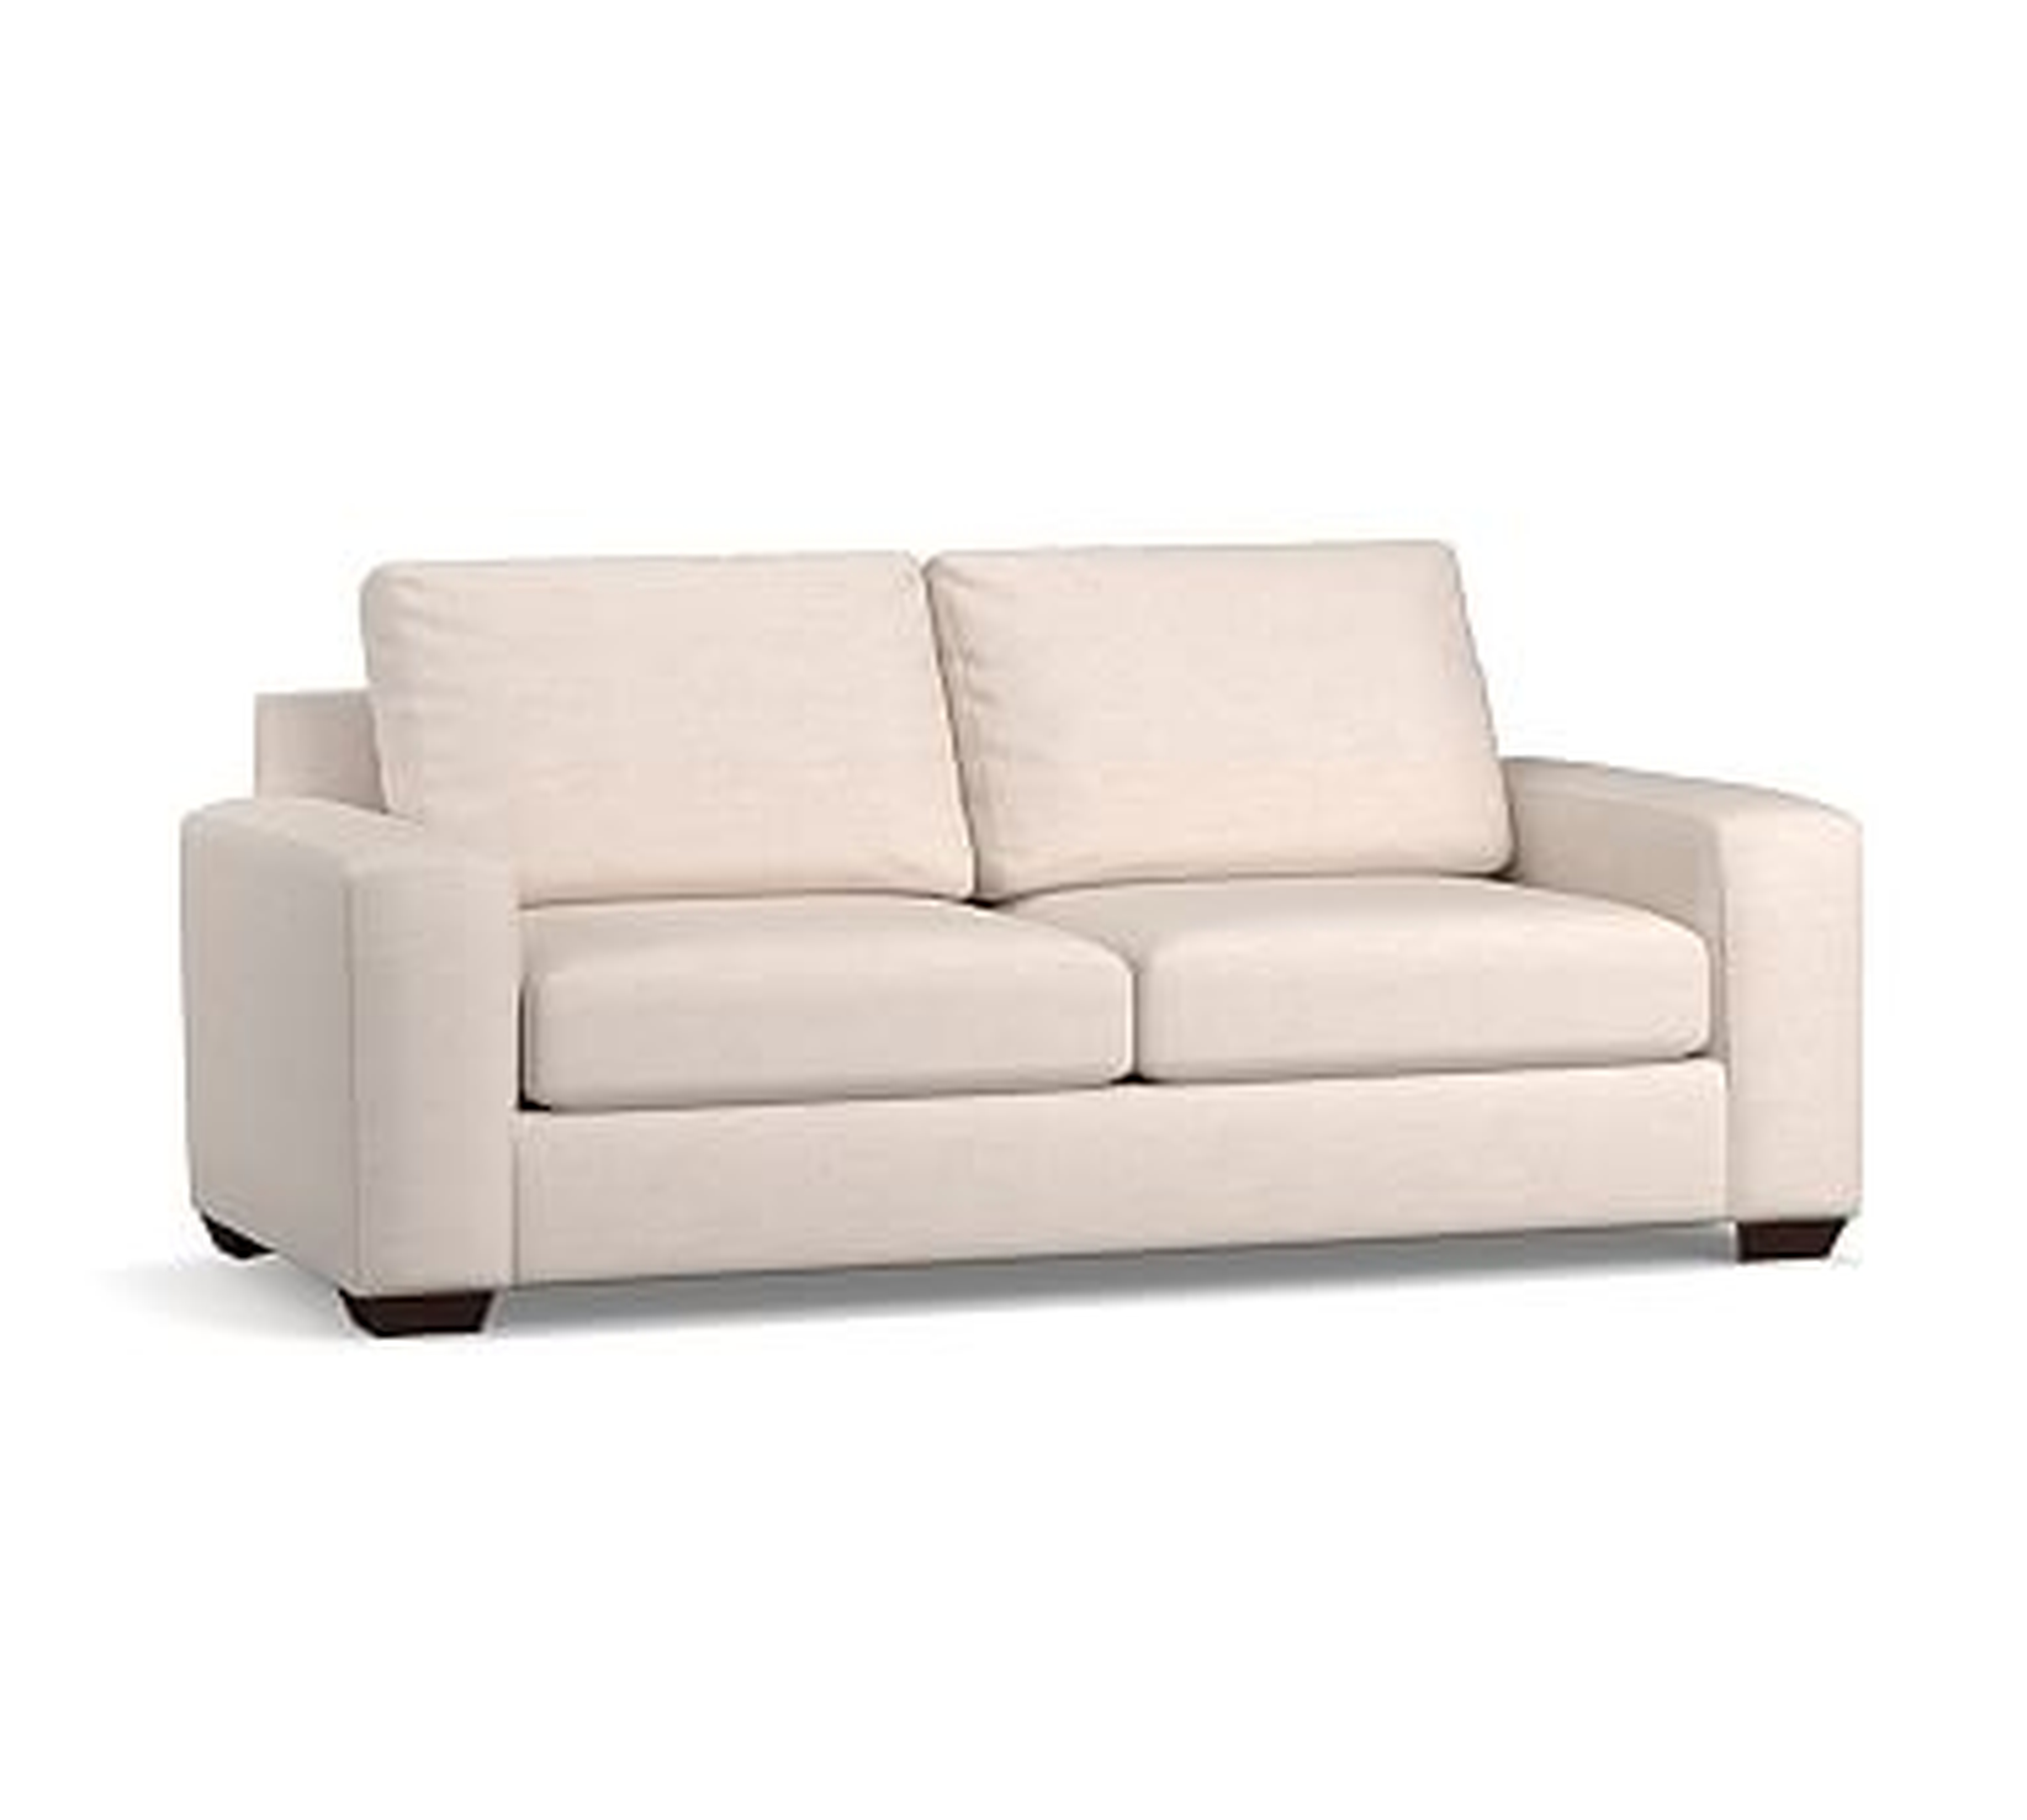 Big Sur Square Arm Upholstered Sofa 82", Down Blend Wrapped Cushions, Performance Everydaylinen(TM) by Crypton(R) Home Oatmeal - Pottery Barn